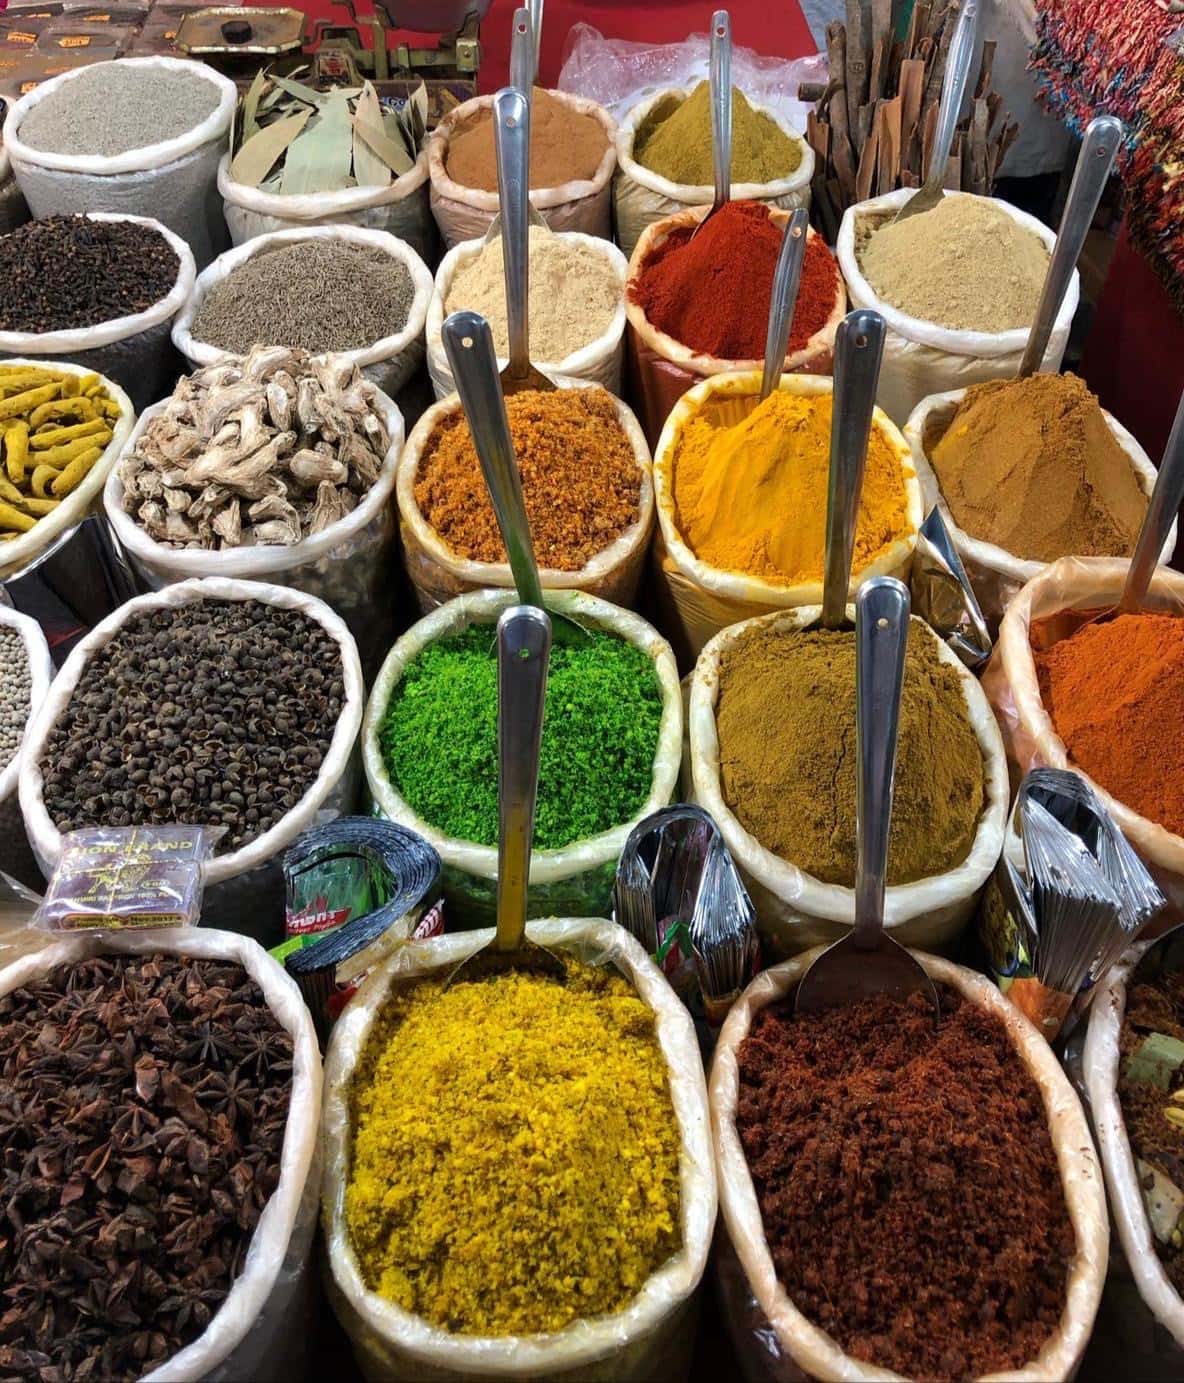 open bags of spices displayed at an Indian market